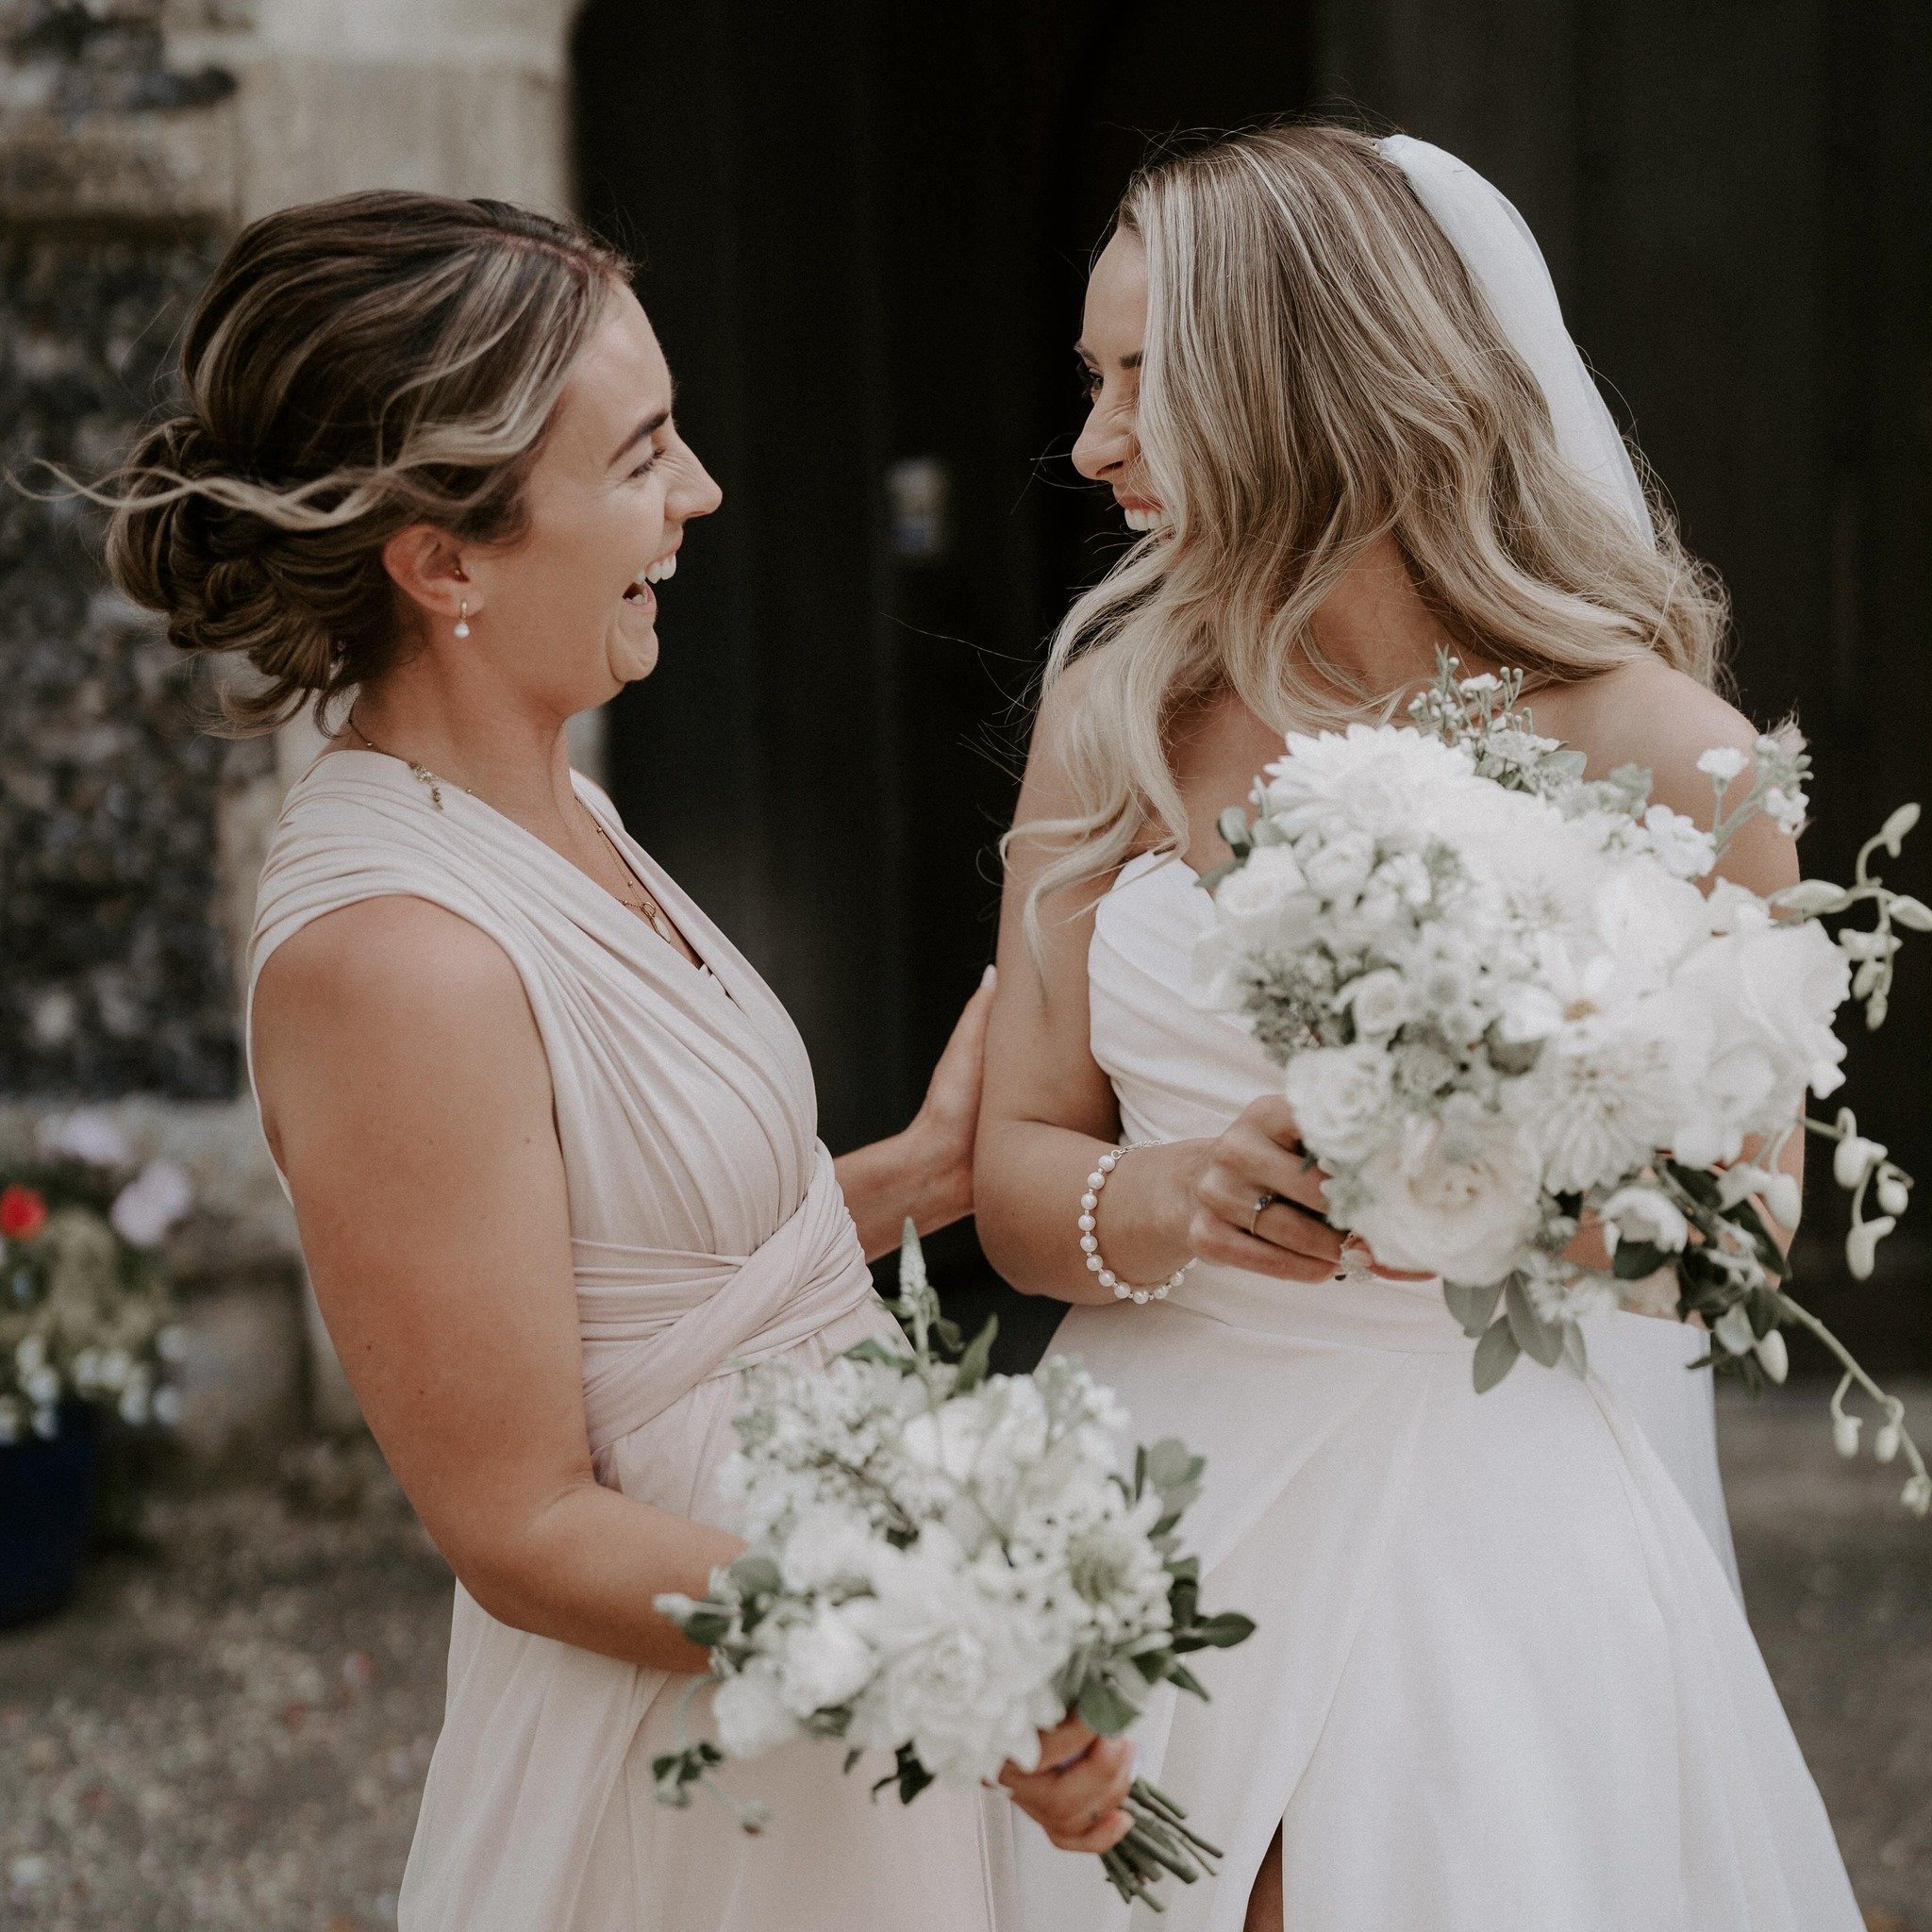 Just married moments between bride and bridesmaid outside of the church&hellip;  I love this photo from @gizelleperryx  wedding - capturing the happiness and emotions on a wedding day &hellip; 

There are so many things to consider when booking weddi